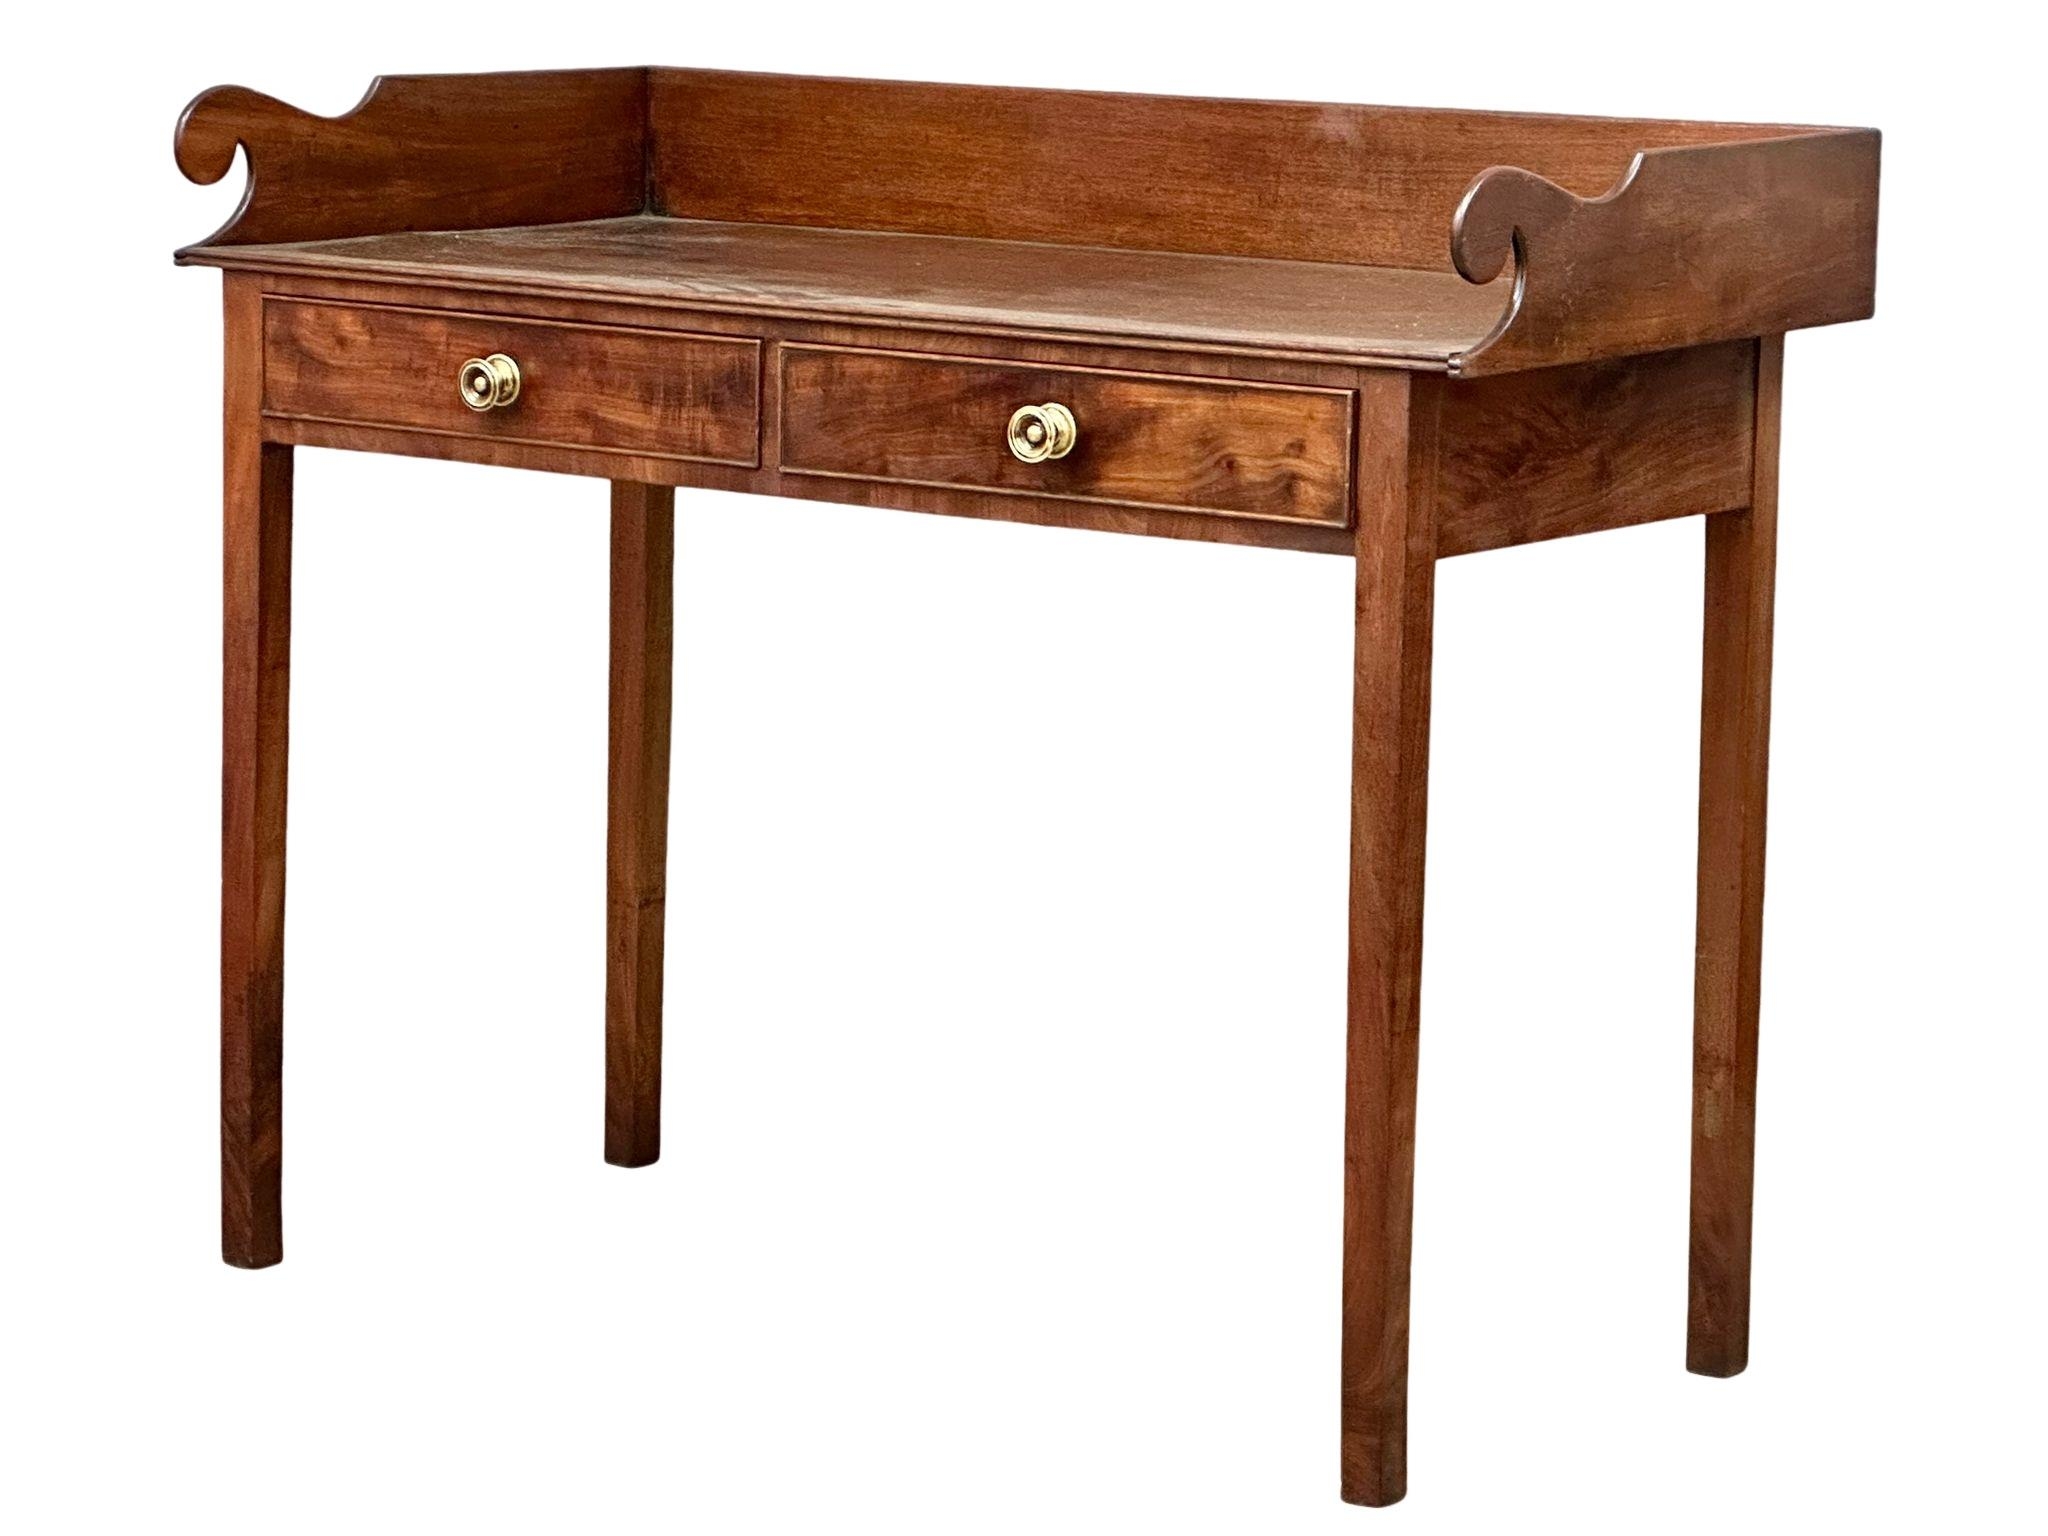 A late George III mahogany gallery back side table/washstand. Circa 1800-1820. 114x55x89cm - Image 2 of 4